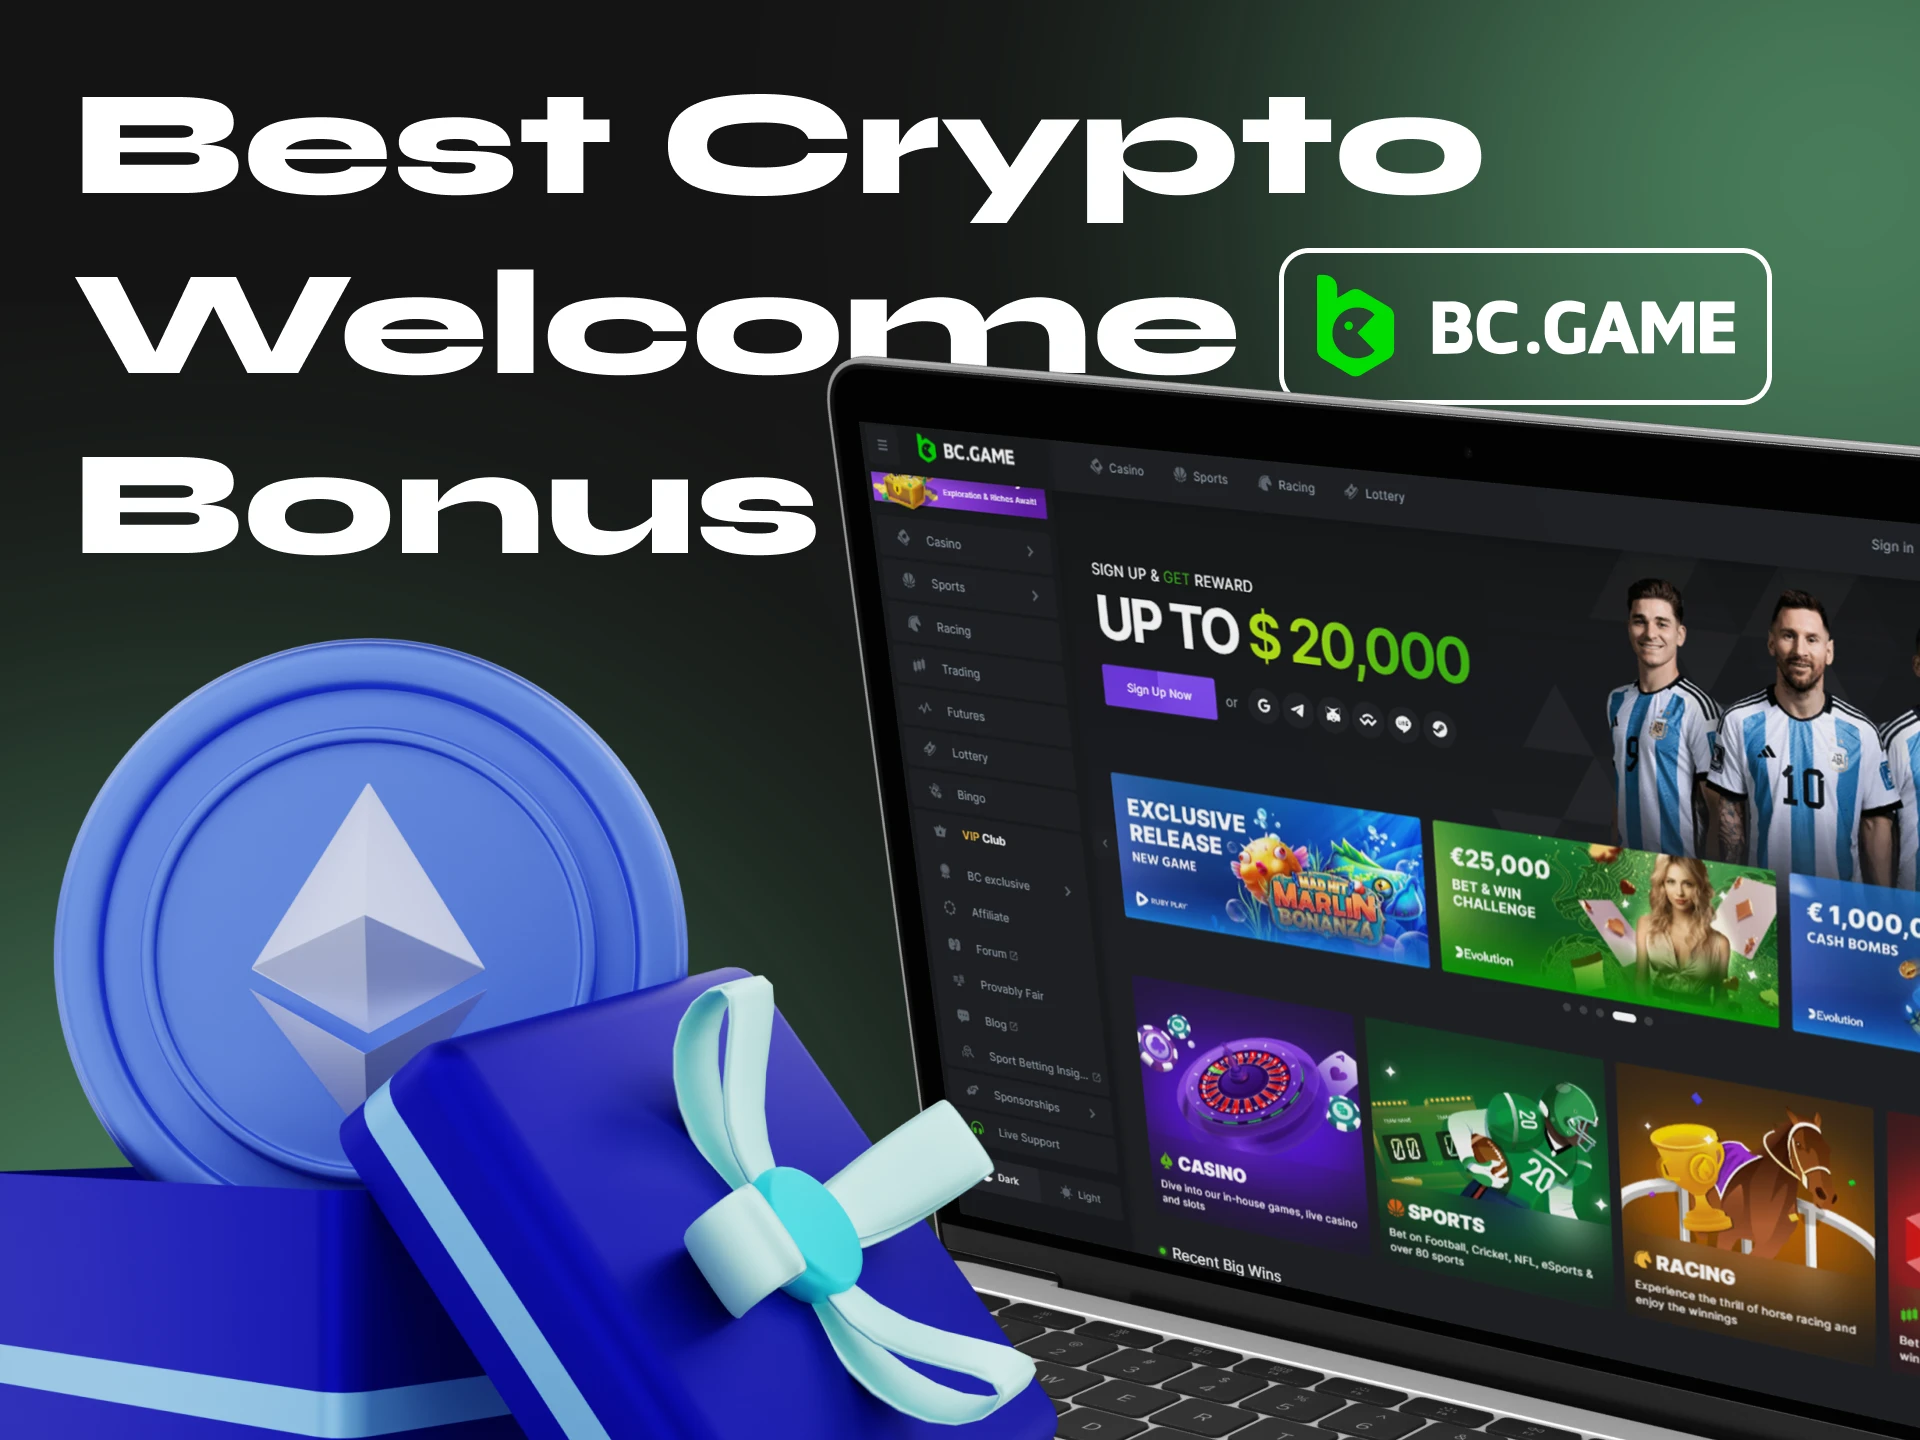 Crypto casino BC.Game offers its newcomers a lucrative welcome bonus for sports betting.